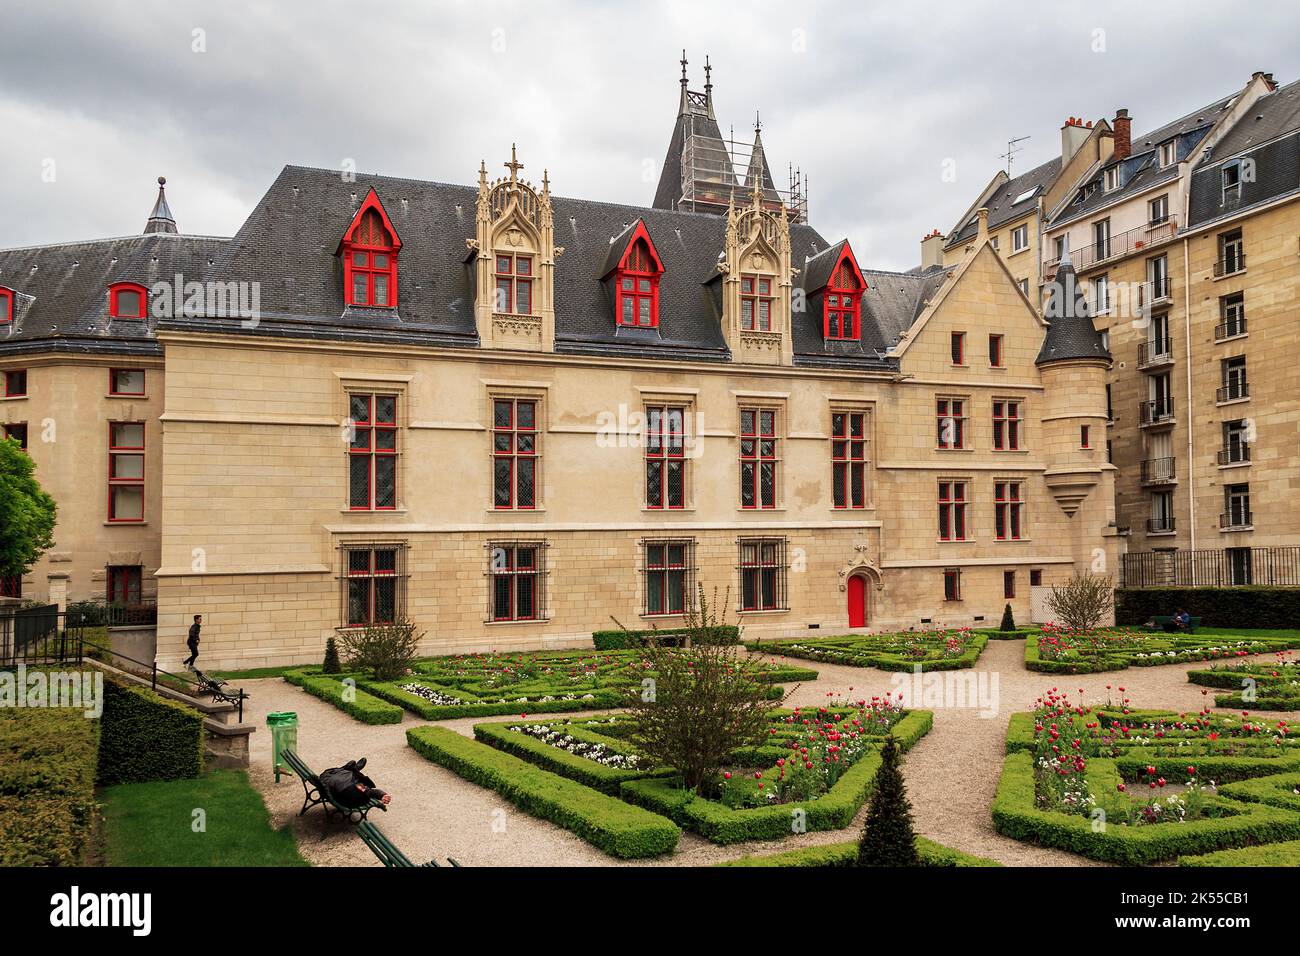 Hotel de Sens is a small urban palace, with architectural elements of a castle or fortress, which combines Gothic and Renaissance styles May 13, 2013 Stock Photo